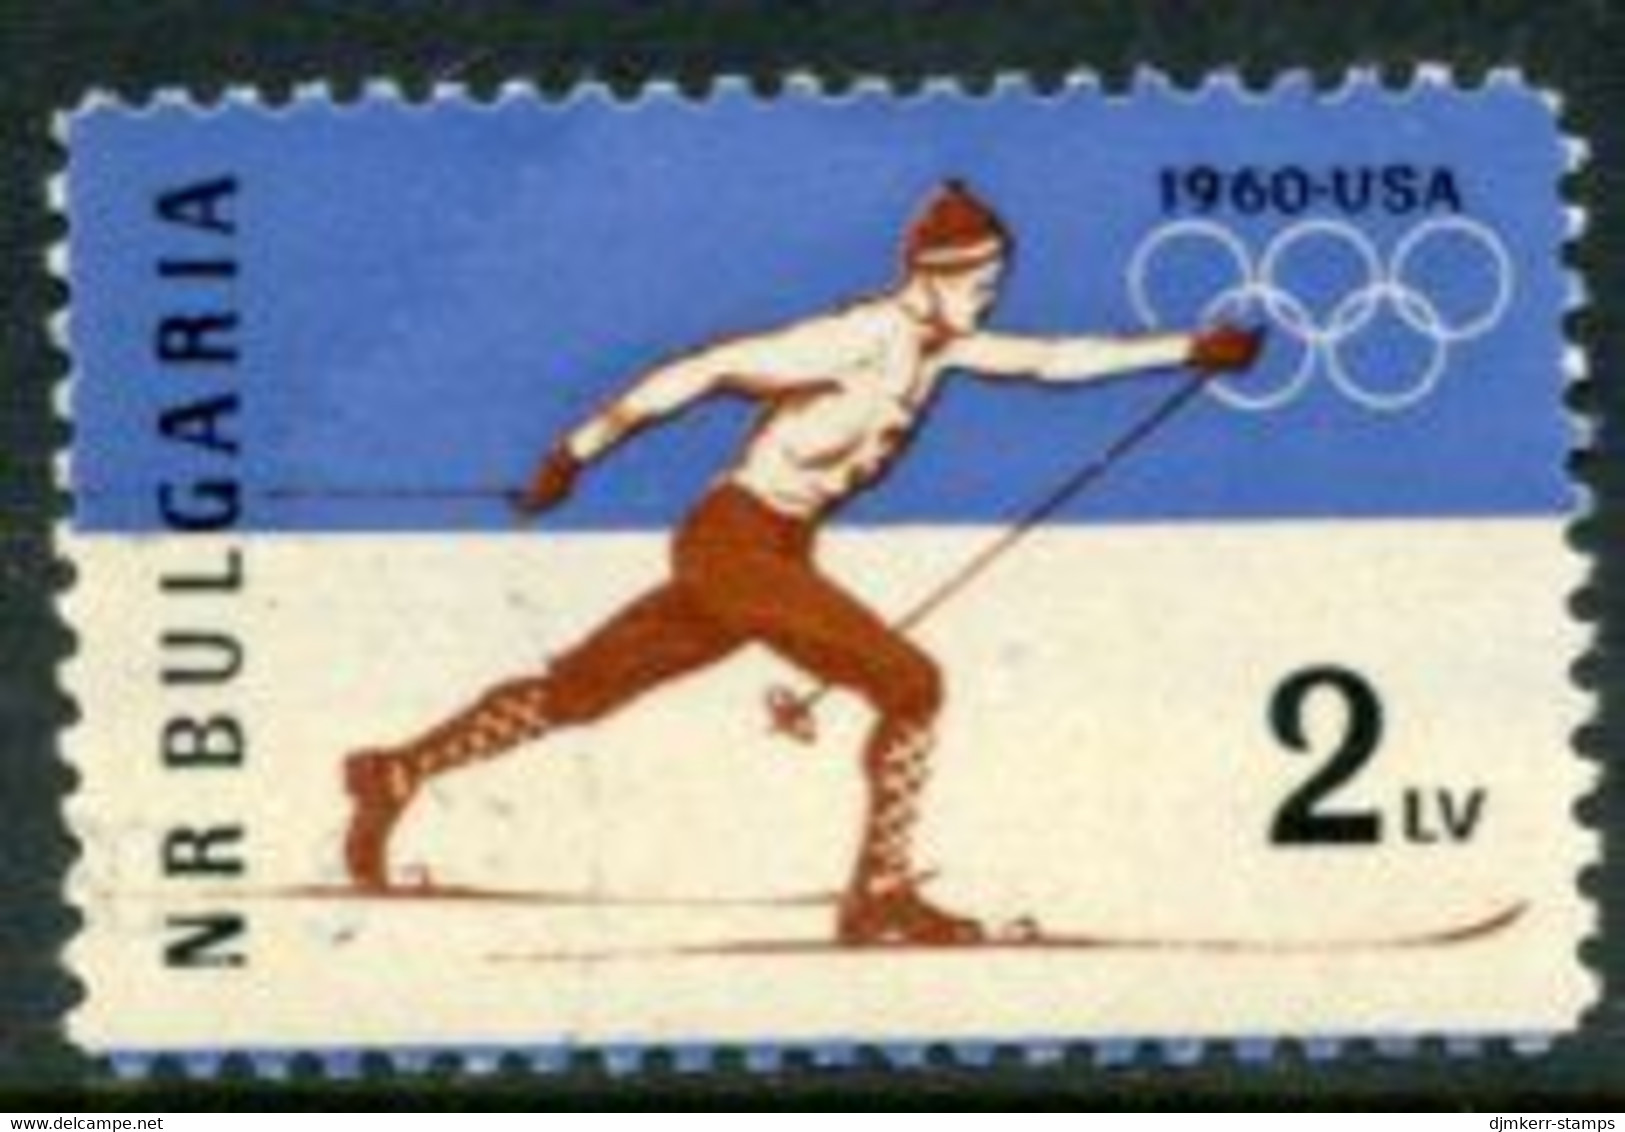 BULGARIA 1960 Winter Olympic Games Perforated MNH / **.  Michel 1153A - Neufs